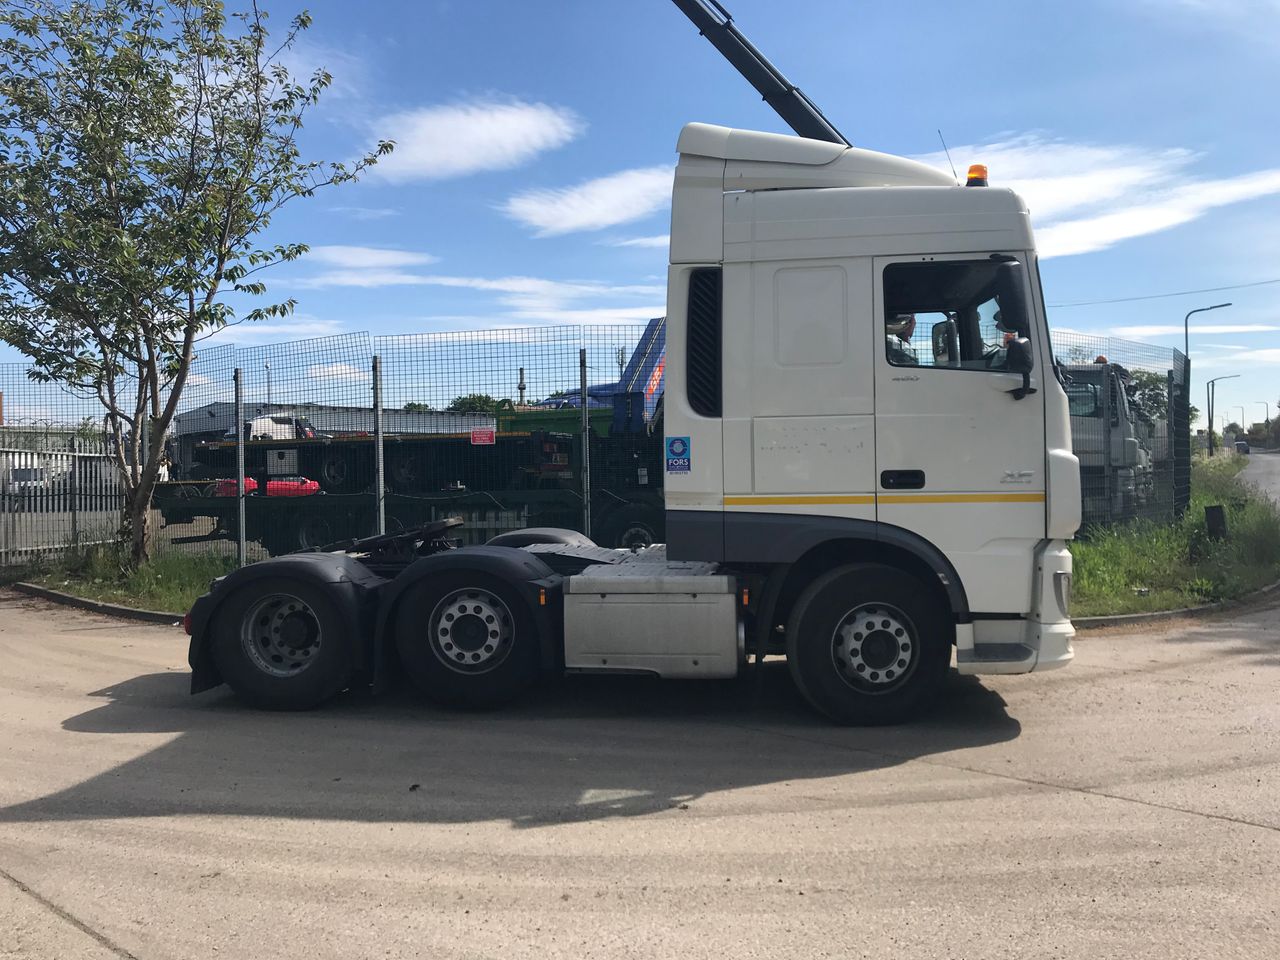 Ready to go DAF XF 460 , Tractor Unit, 460, 44 Tonne, Space Cab, Automatic, Rear Air Suspension, Double Bunk, Air Conditioning, Sun Roof, Height Indicator, , -, - | for sale at MV Commercial, the UKs leading Truck, Trailers and Van supplier. (DX16AEN 32535)